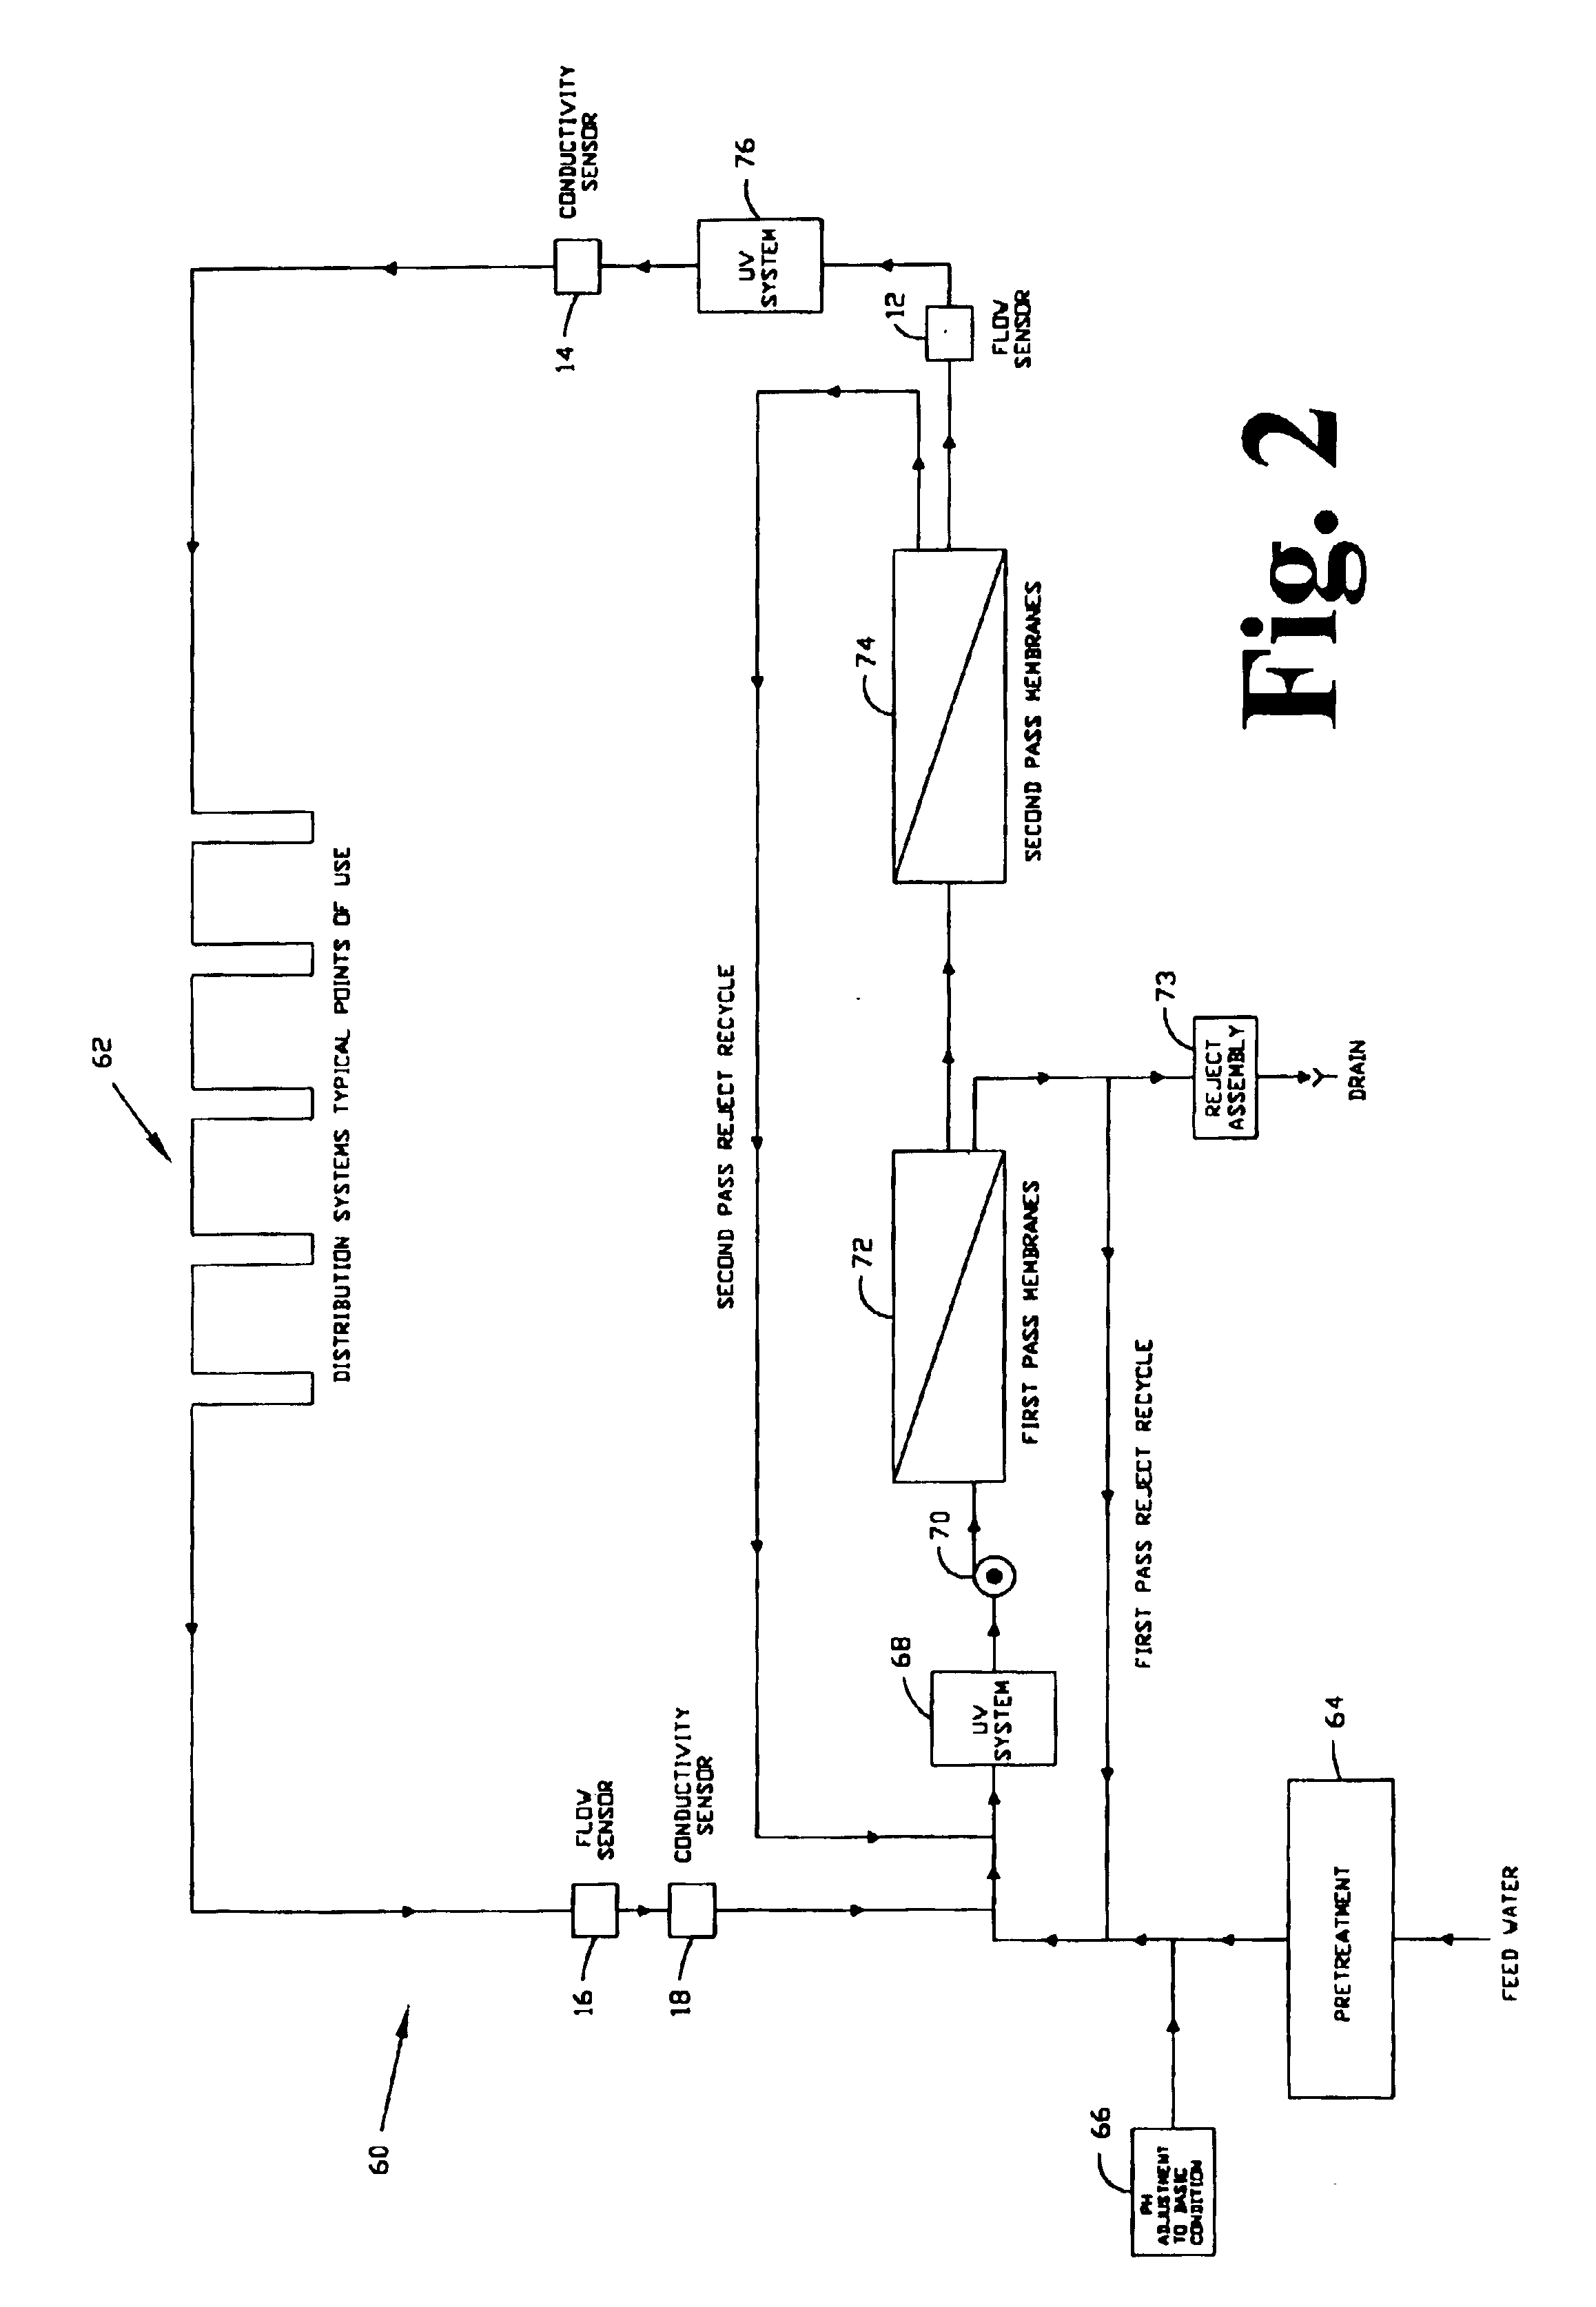 Apparatus and method for producing purified water having microbiological purity